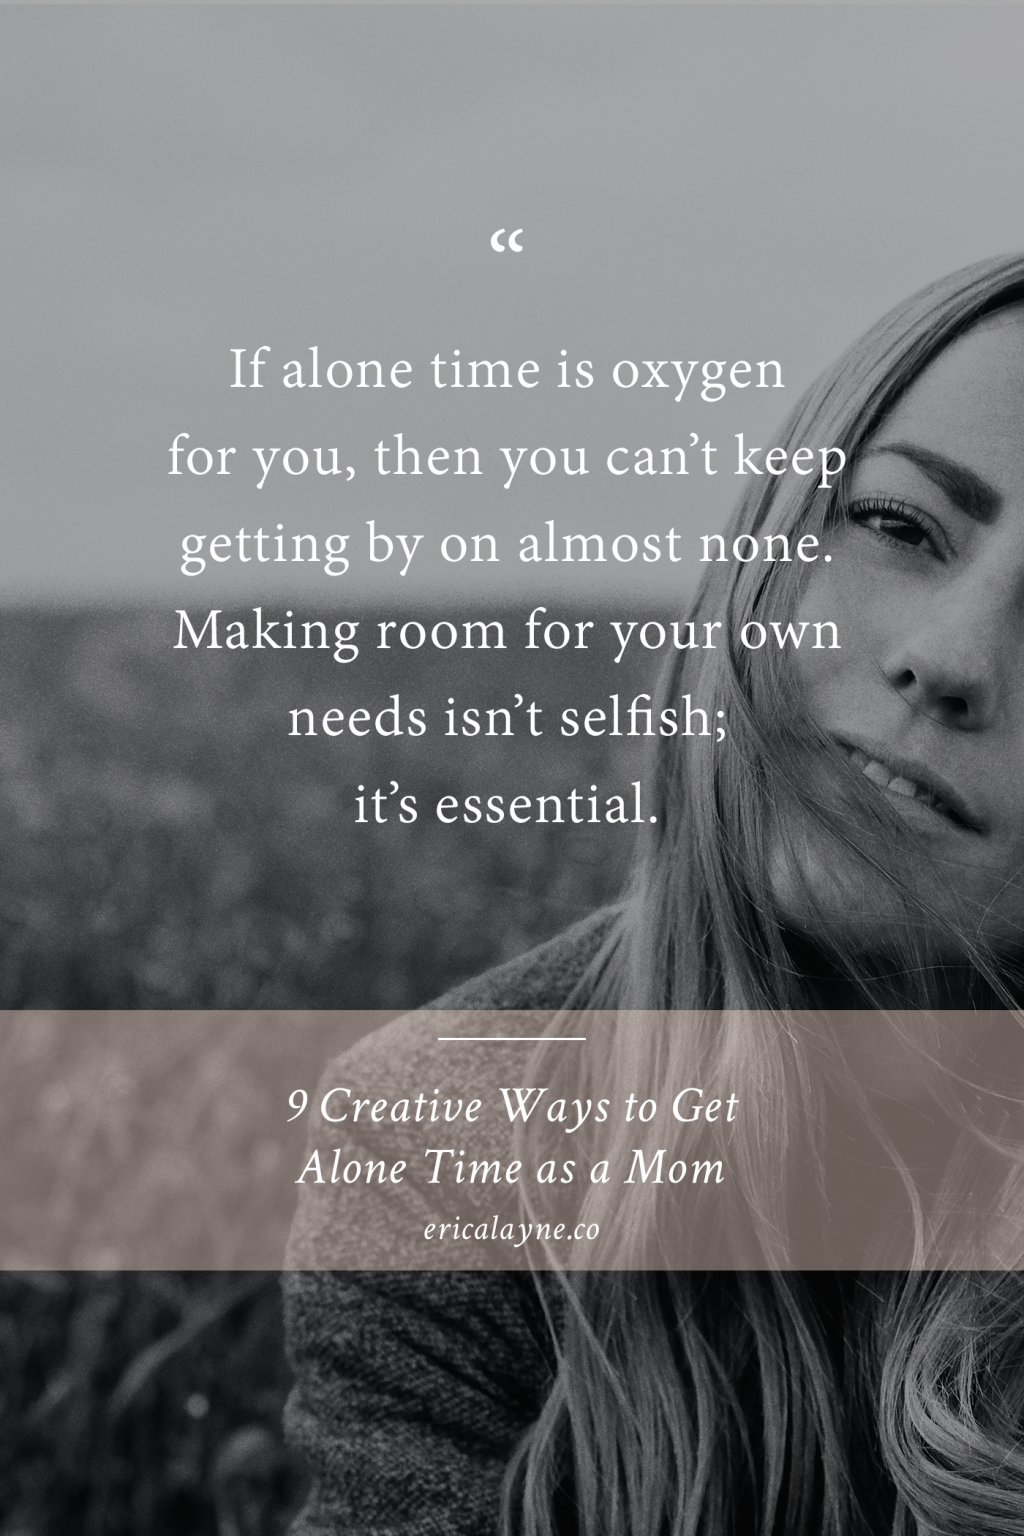 9 Creative Ways to Get Alone Time as a Mom